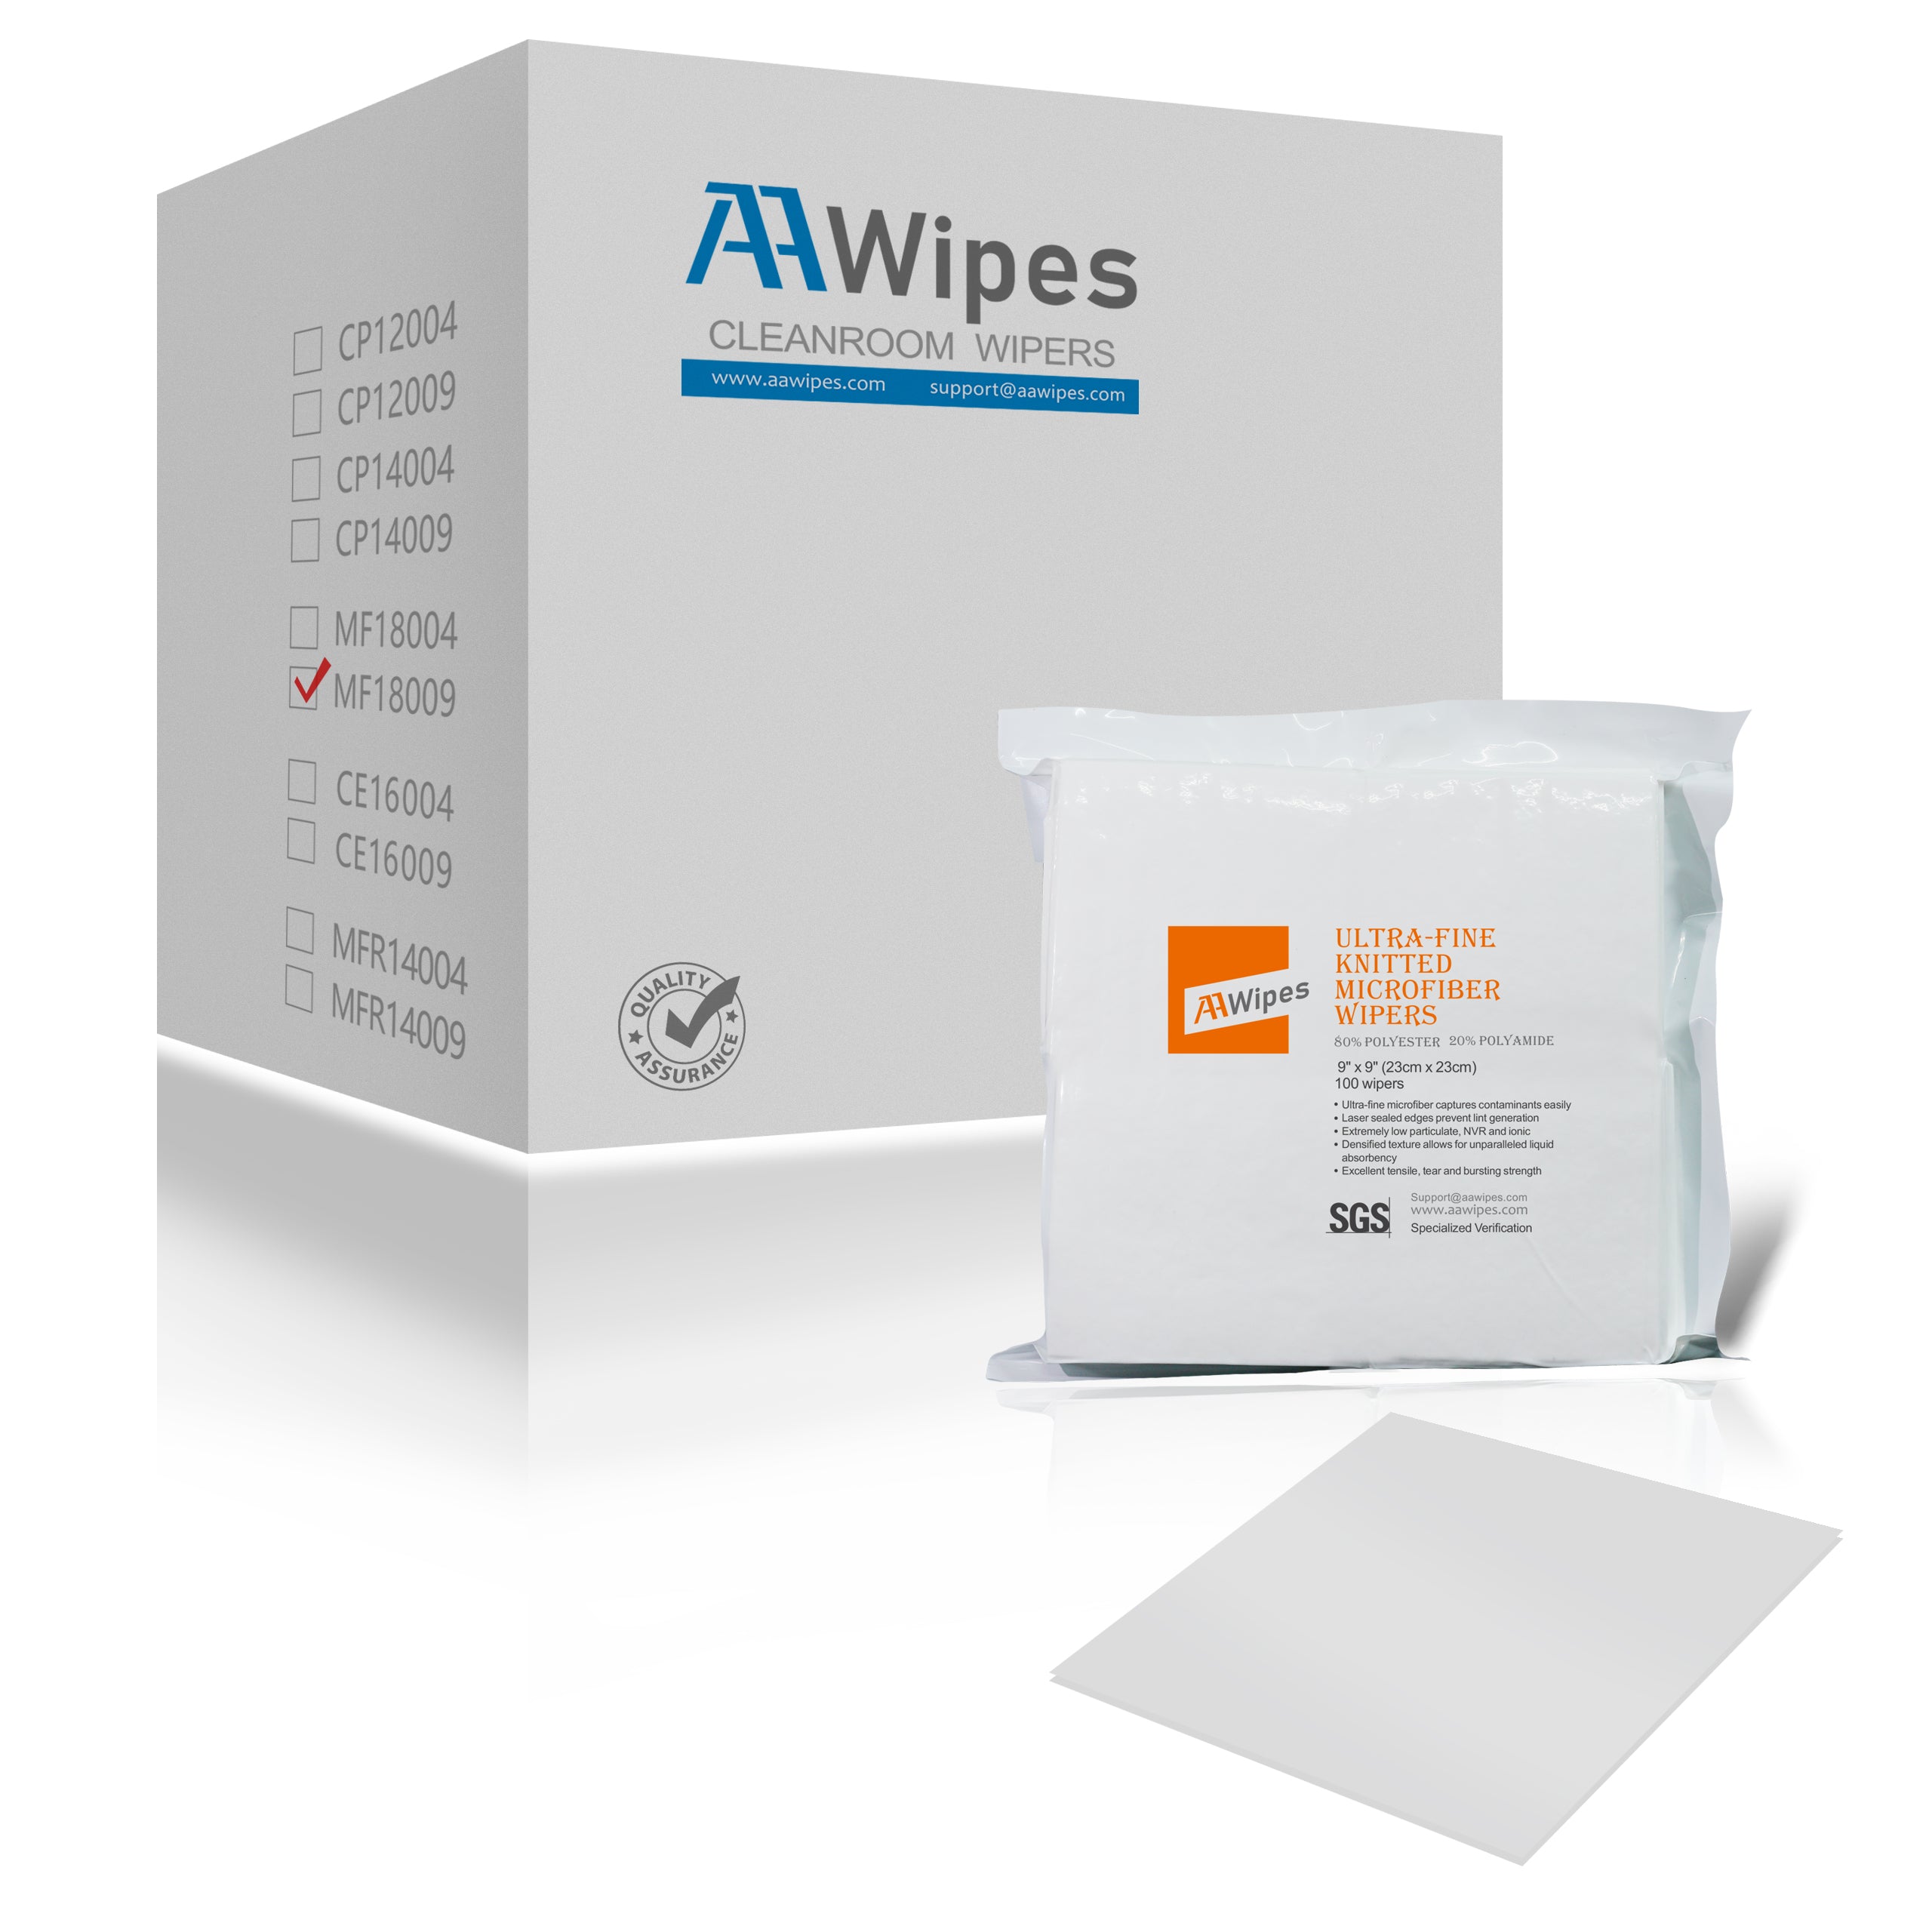 Cleanroom Ultrafine Microfiber Wipers 9"x9" (Starting at 1 Box with 2,000 Wipes per 20 Bags, 180gsm), Laser Sealed Edge, Class 100 Cloths (No. MF18009)